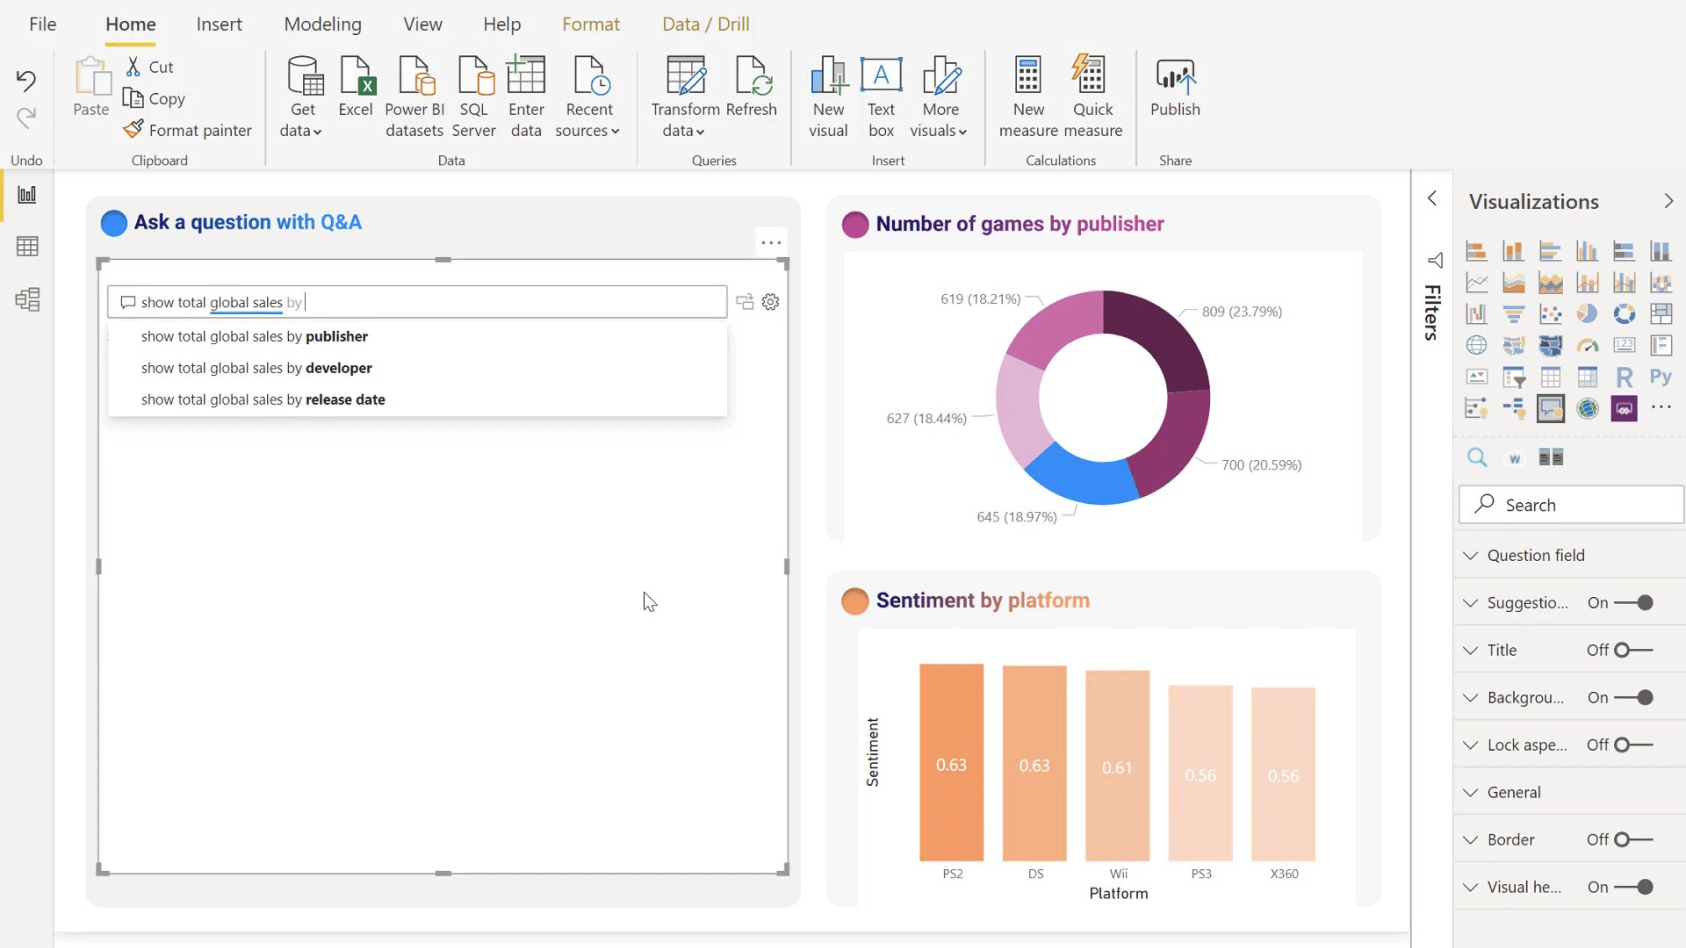 Power BI benefits over Sisense - Better visualization, more actionable insights